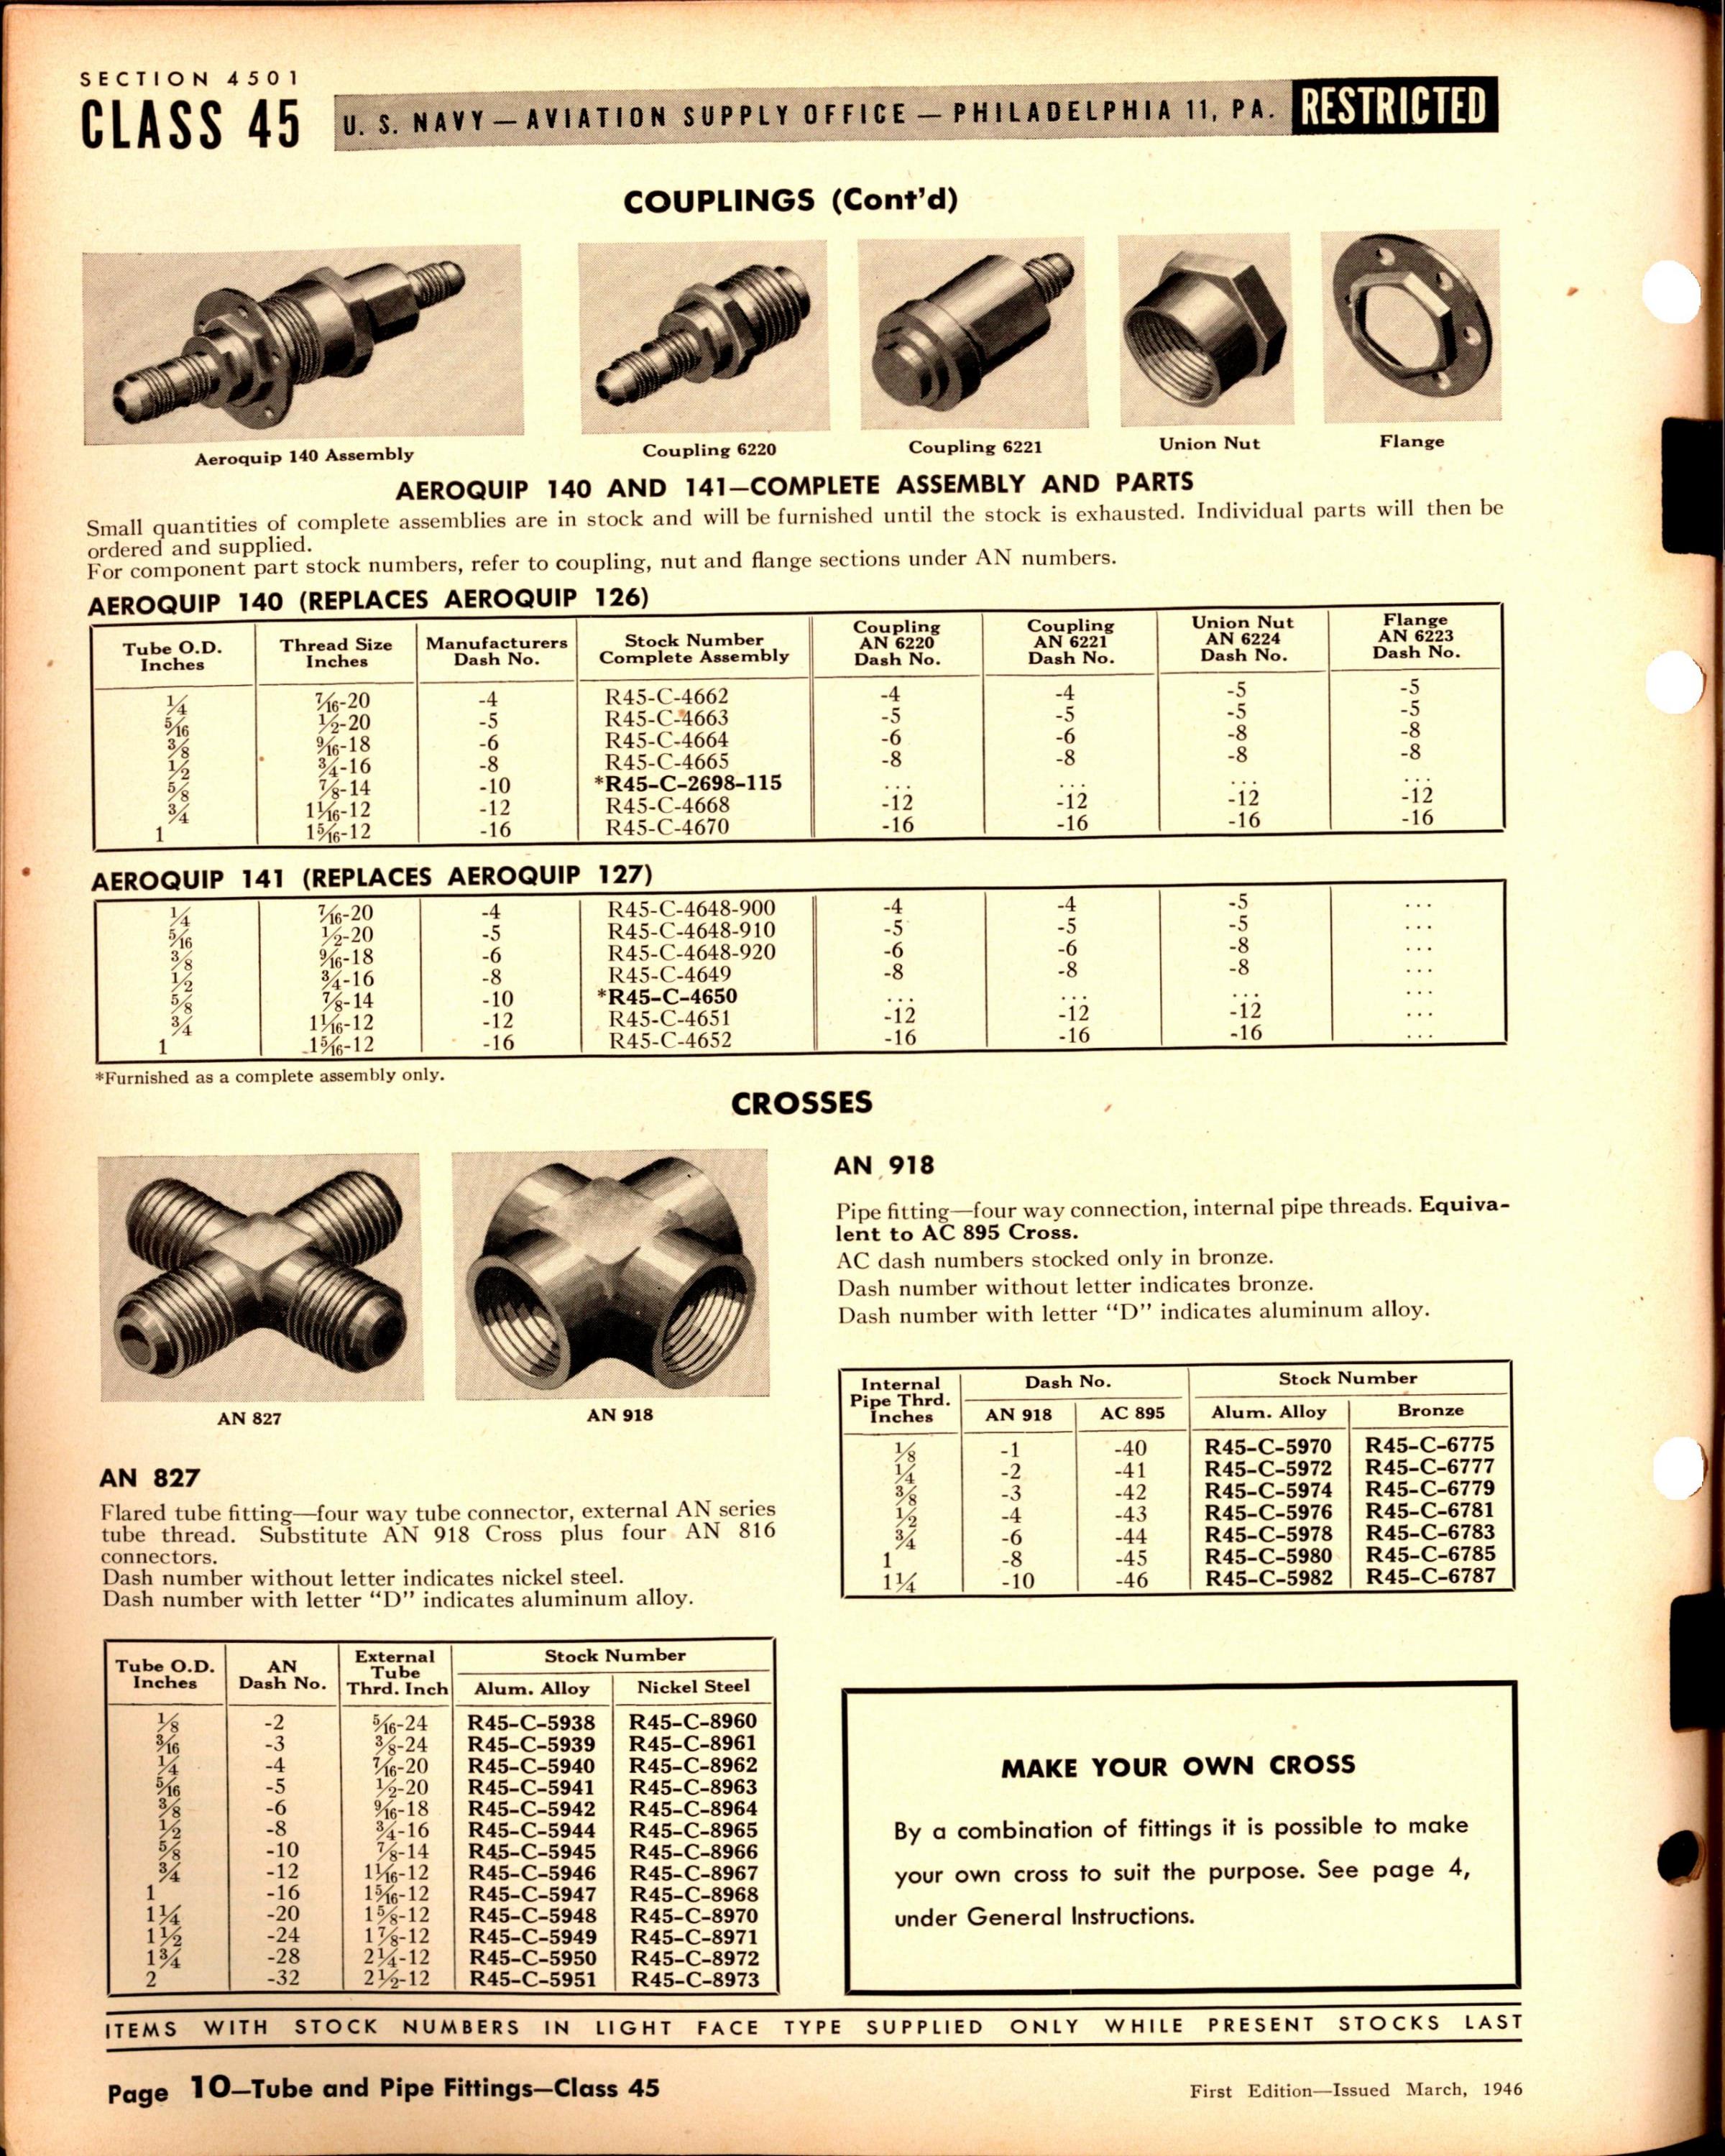 Sample page 10 from AirCorps Library document: Tube and Pipe Fittings